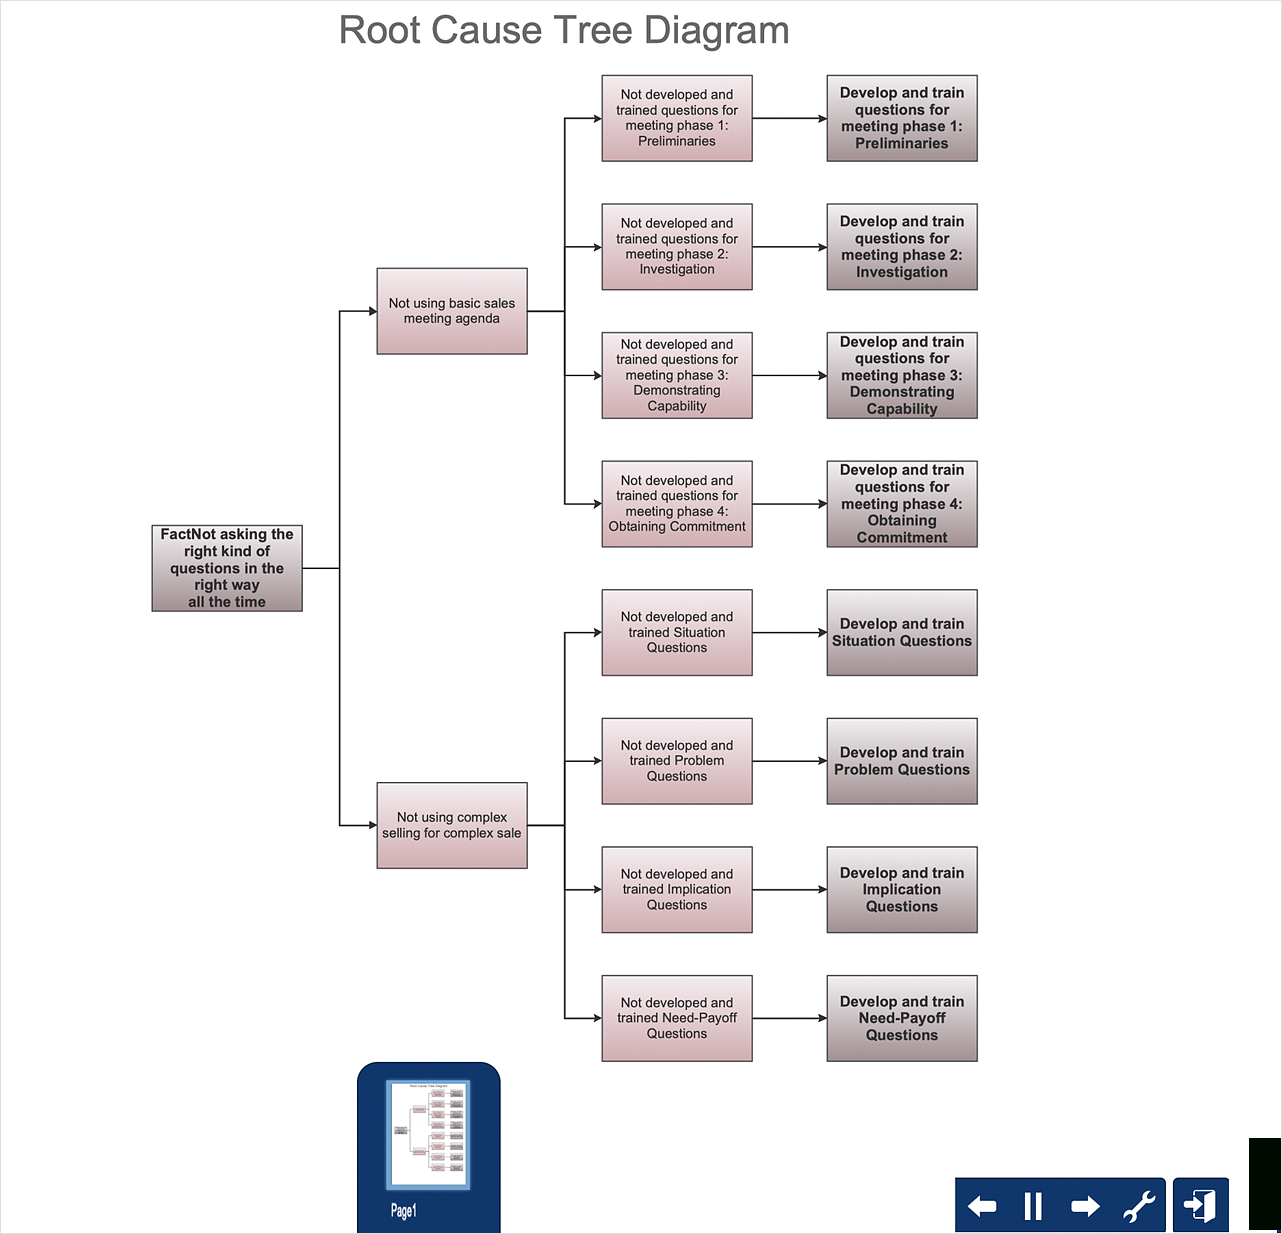 Root Cause Analysis Tree Diagram – Template | How To Create For Blank Tree Diagram Template